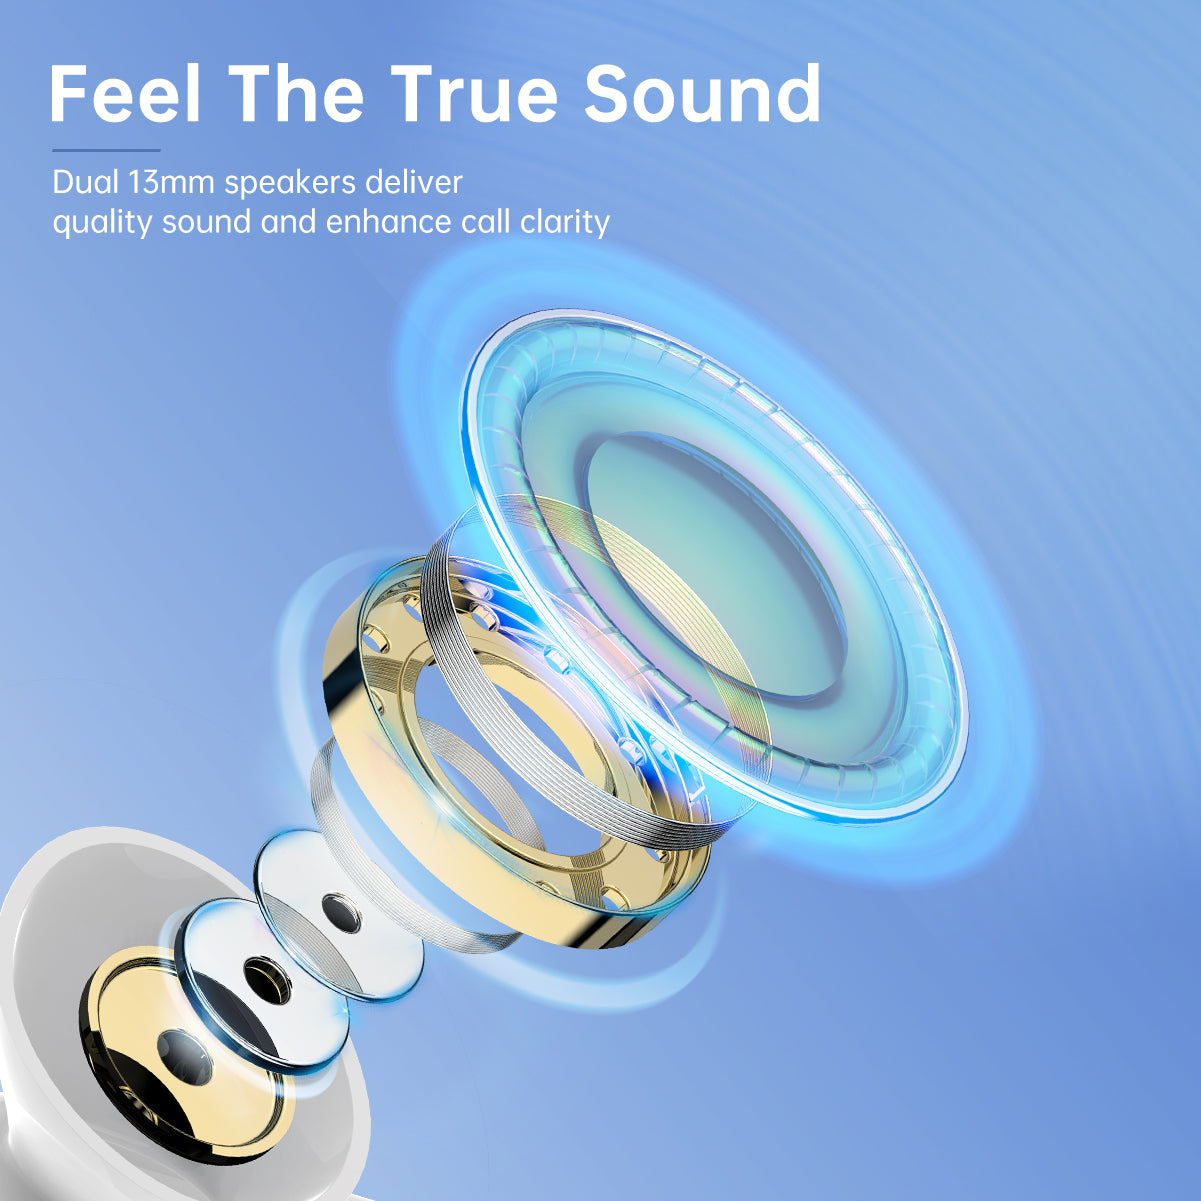 image 2 of Wireless EarbudsBluetooth 5.0 Wireless Earbuds Bluetooth Headphones with Deep Bass HiFi 3D Stereo Sound Built-in Mic Earphones with Portable Charging Case for Smartphones and Laptops (White)